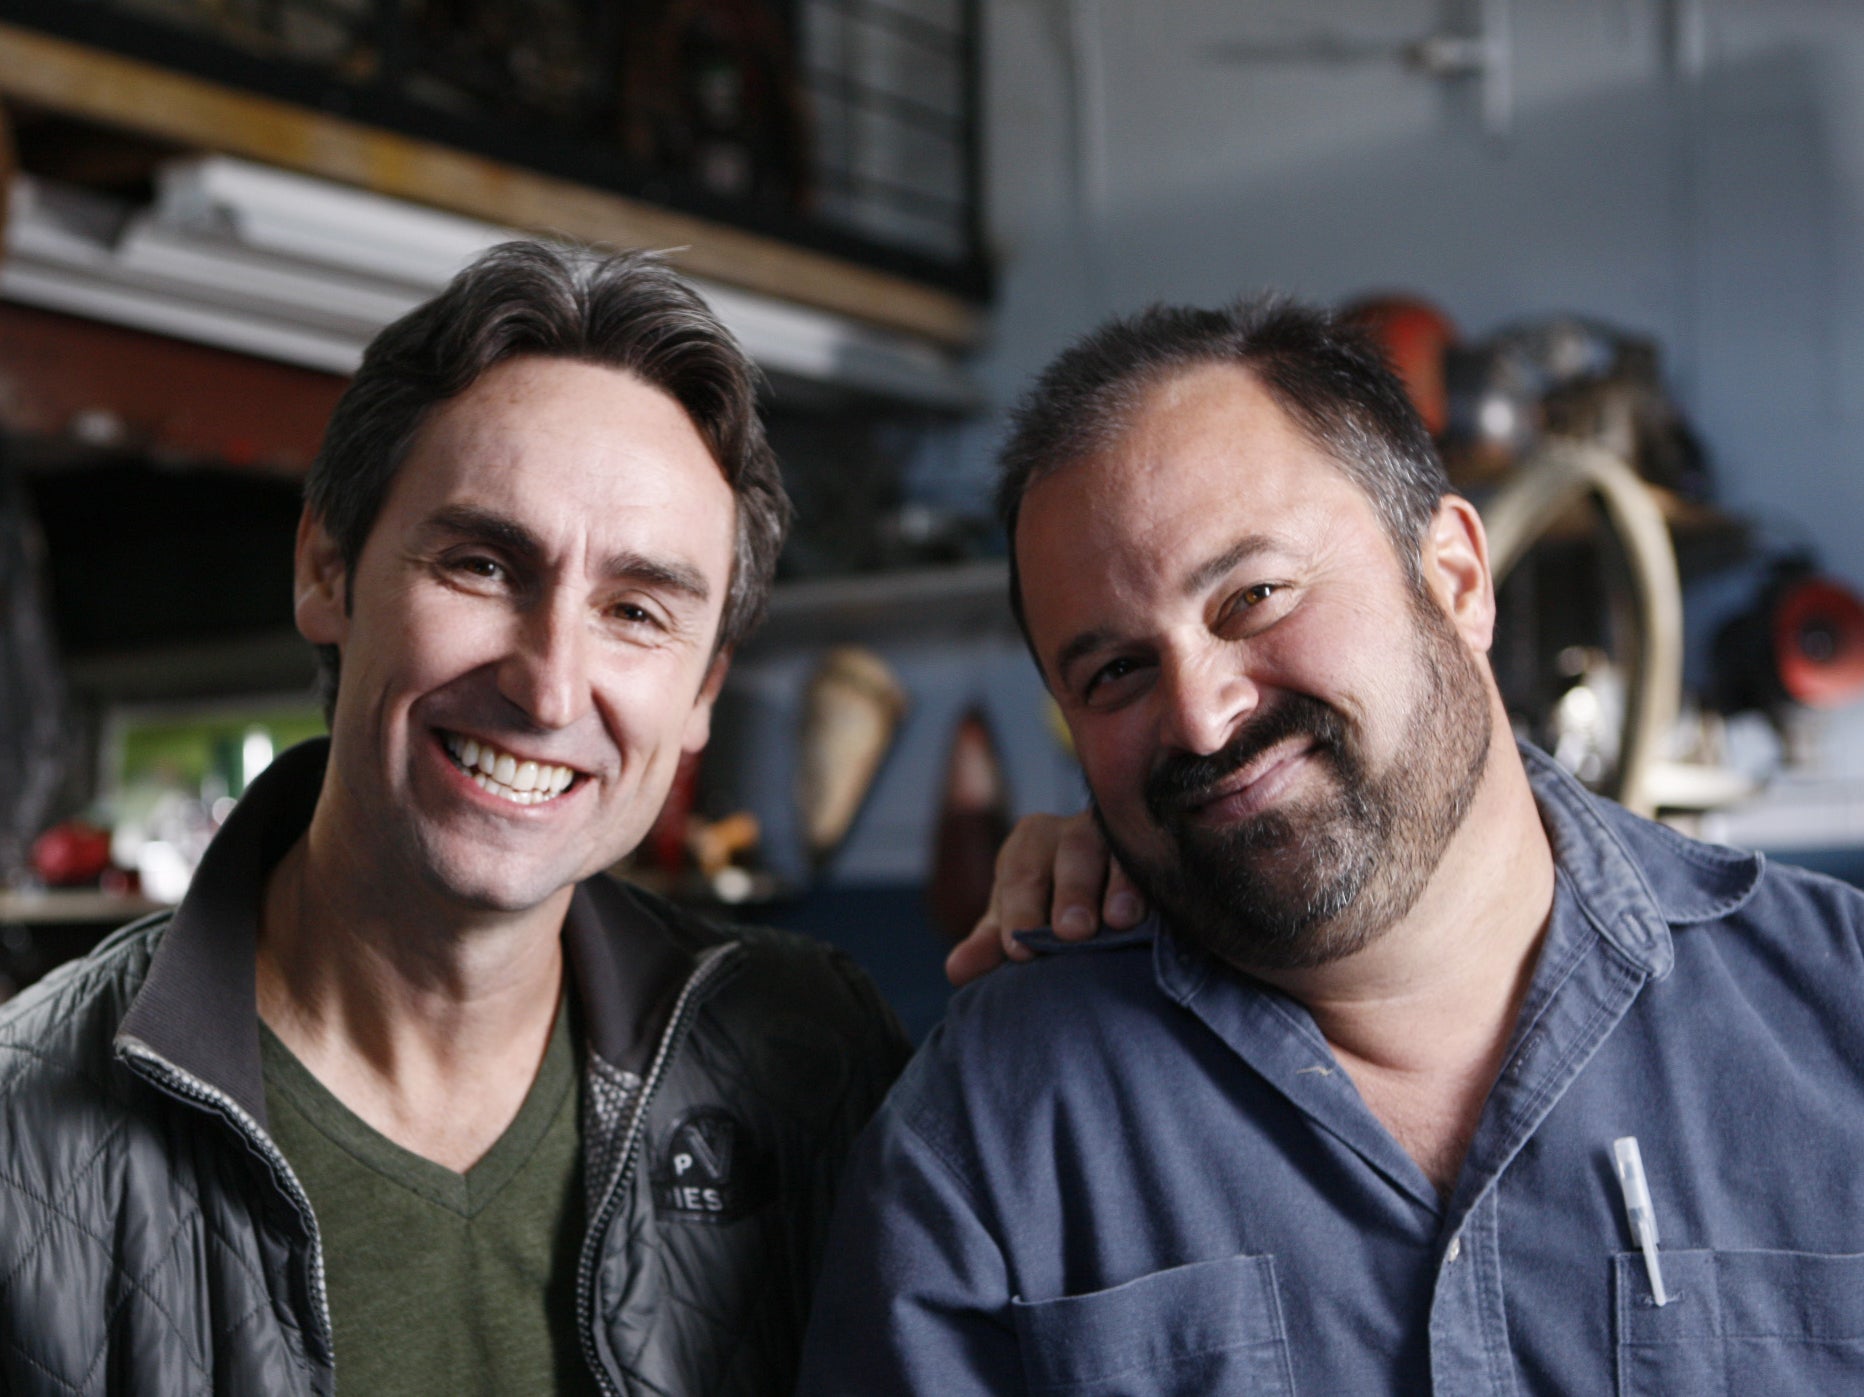 Mike Wolfe and Frank Fritz presented ‘American Pickers’ together